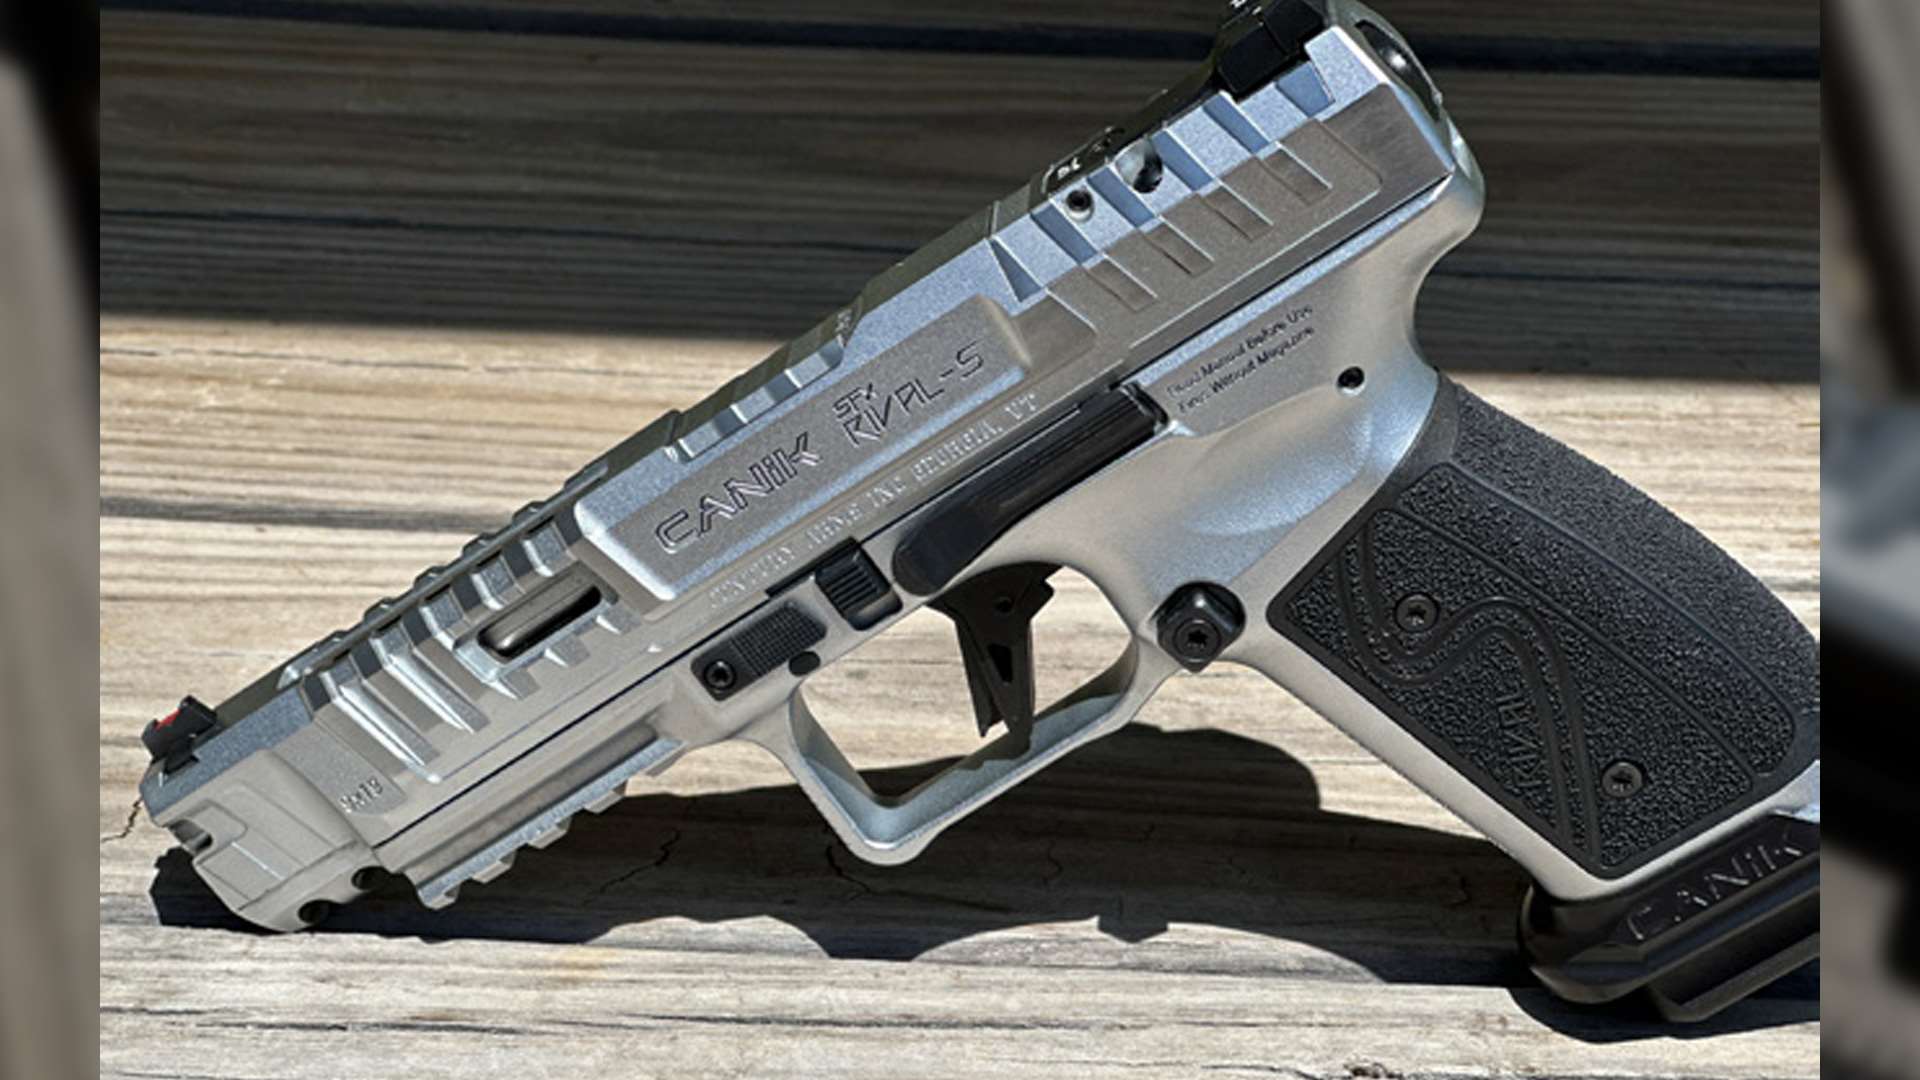 SFx Rival-S 9mm side view